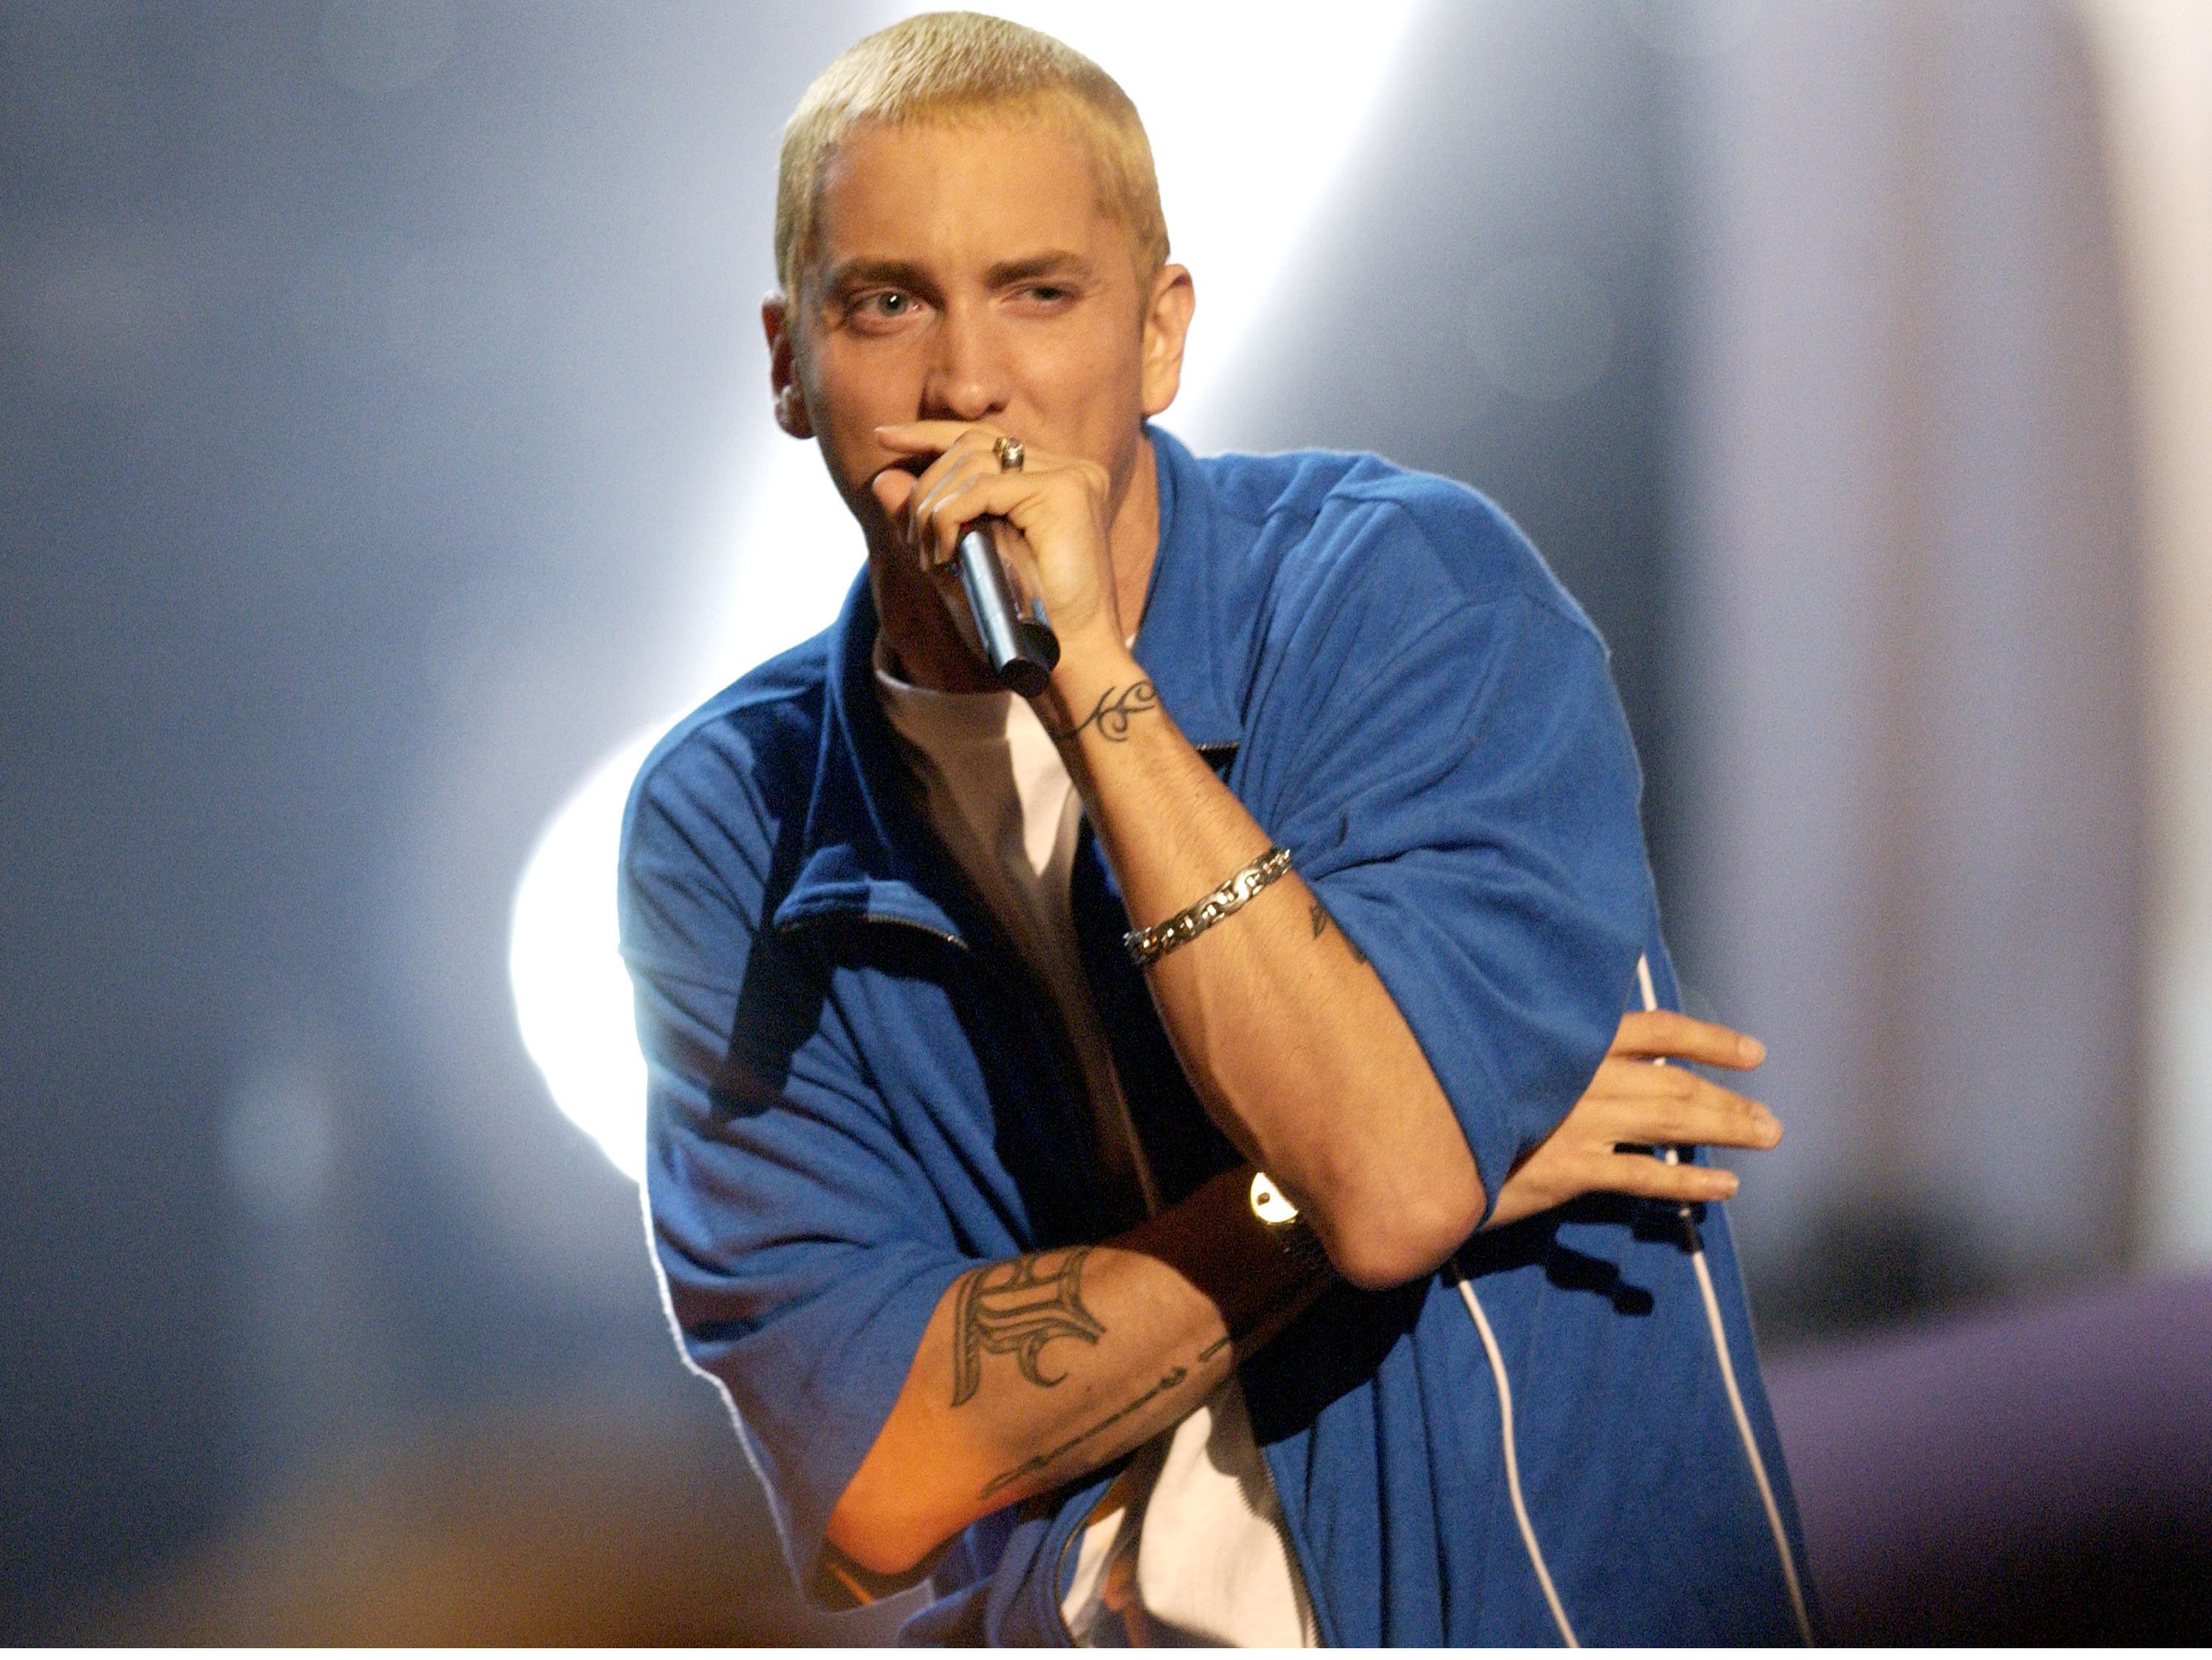 Eminem wearing a blue jacket and holding a microphone